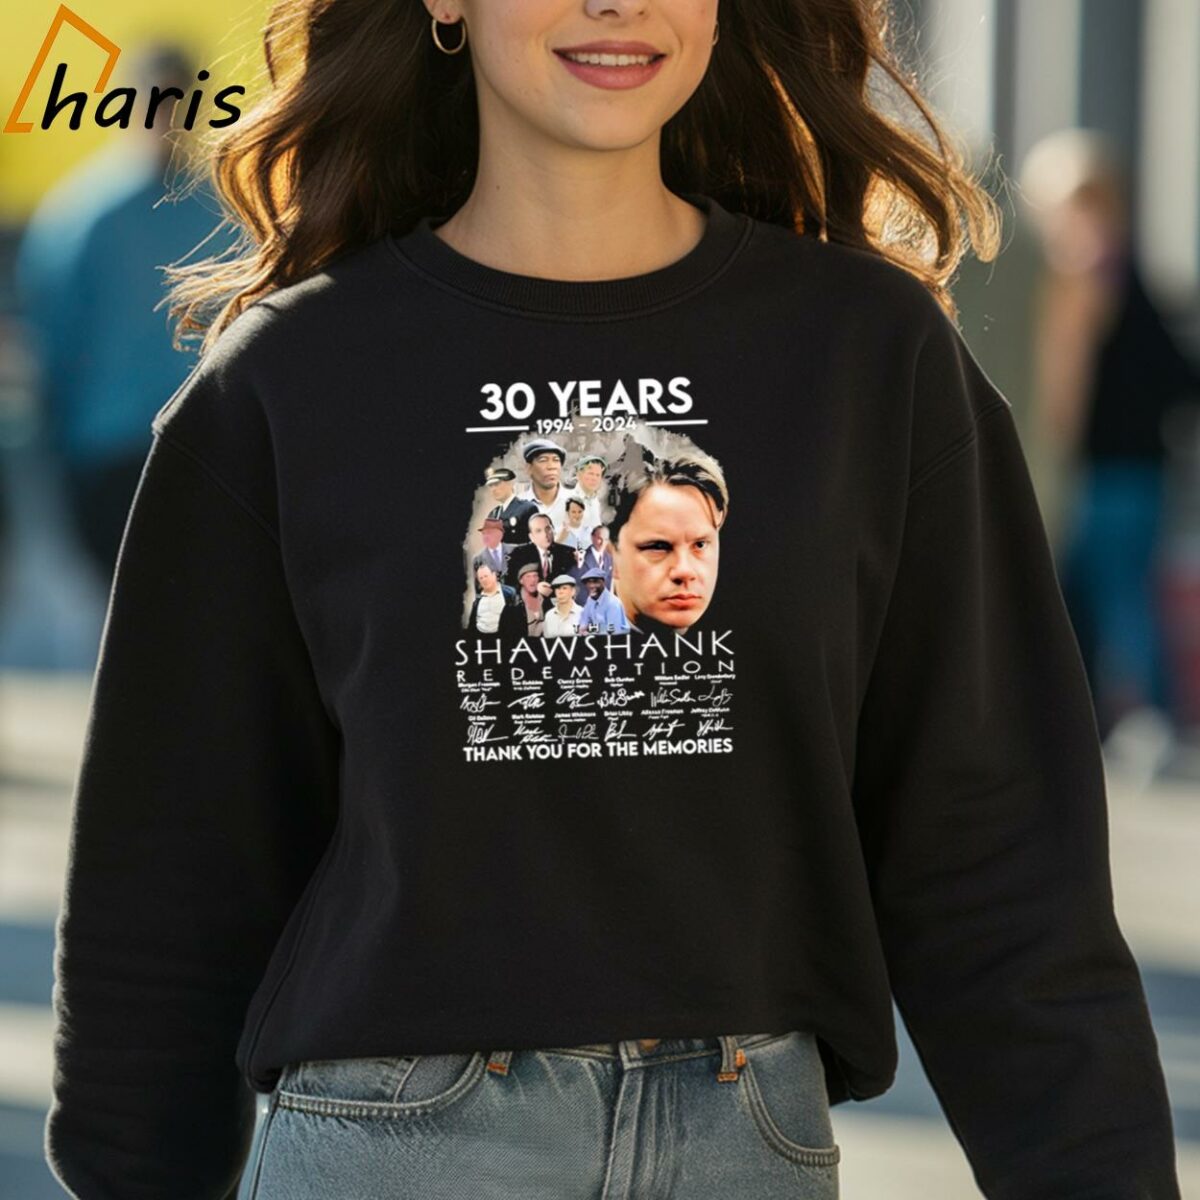 30 Years 1994 2024 The Shawshank Redemption Members Thank You For The Memories T Shirt 3 sweatshirt